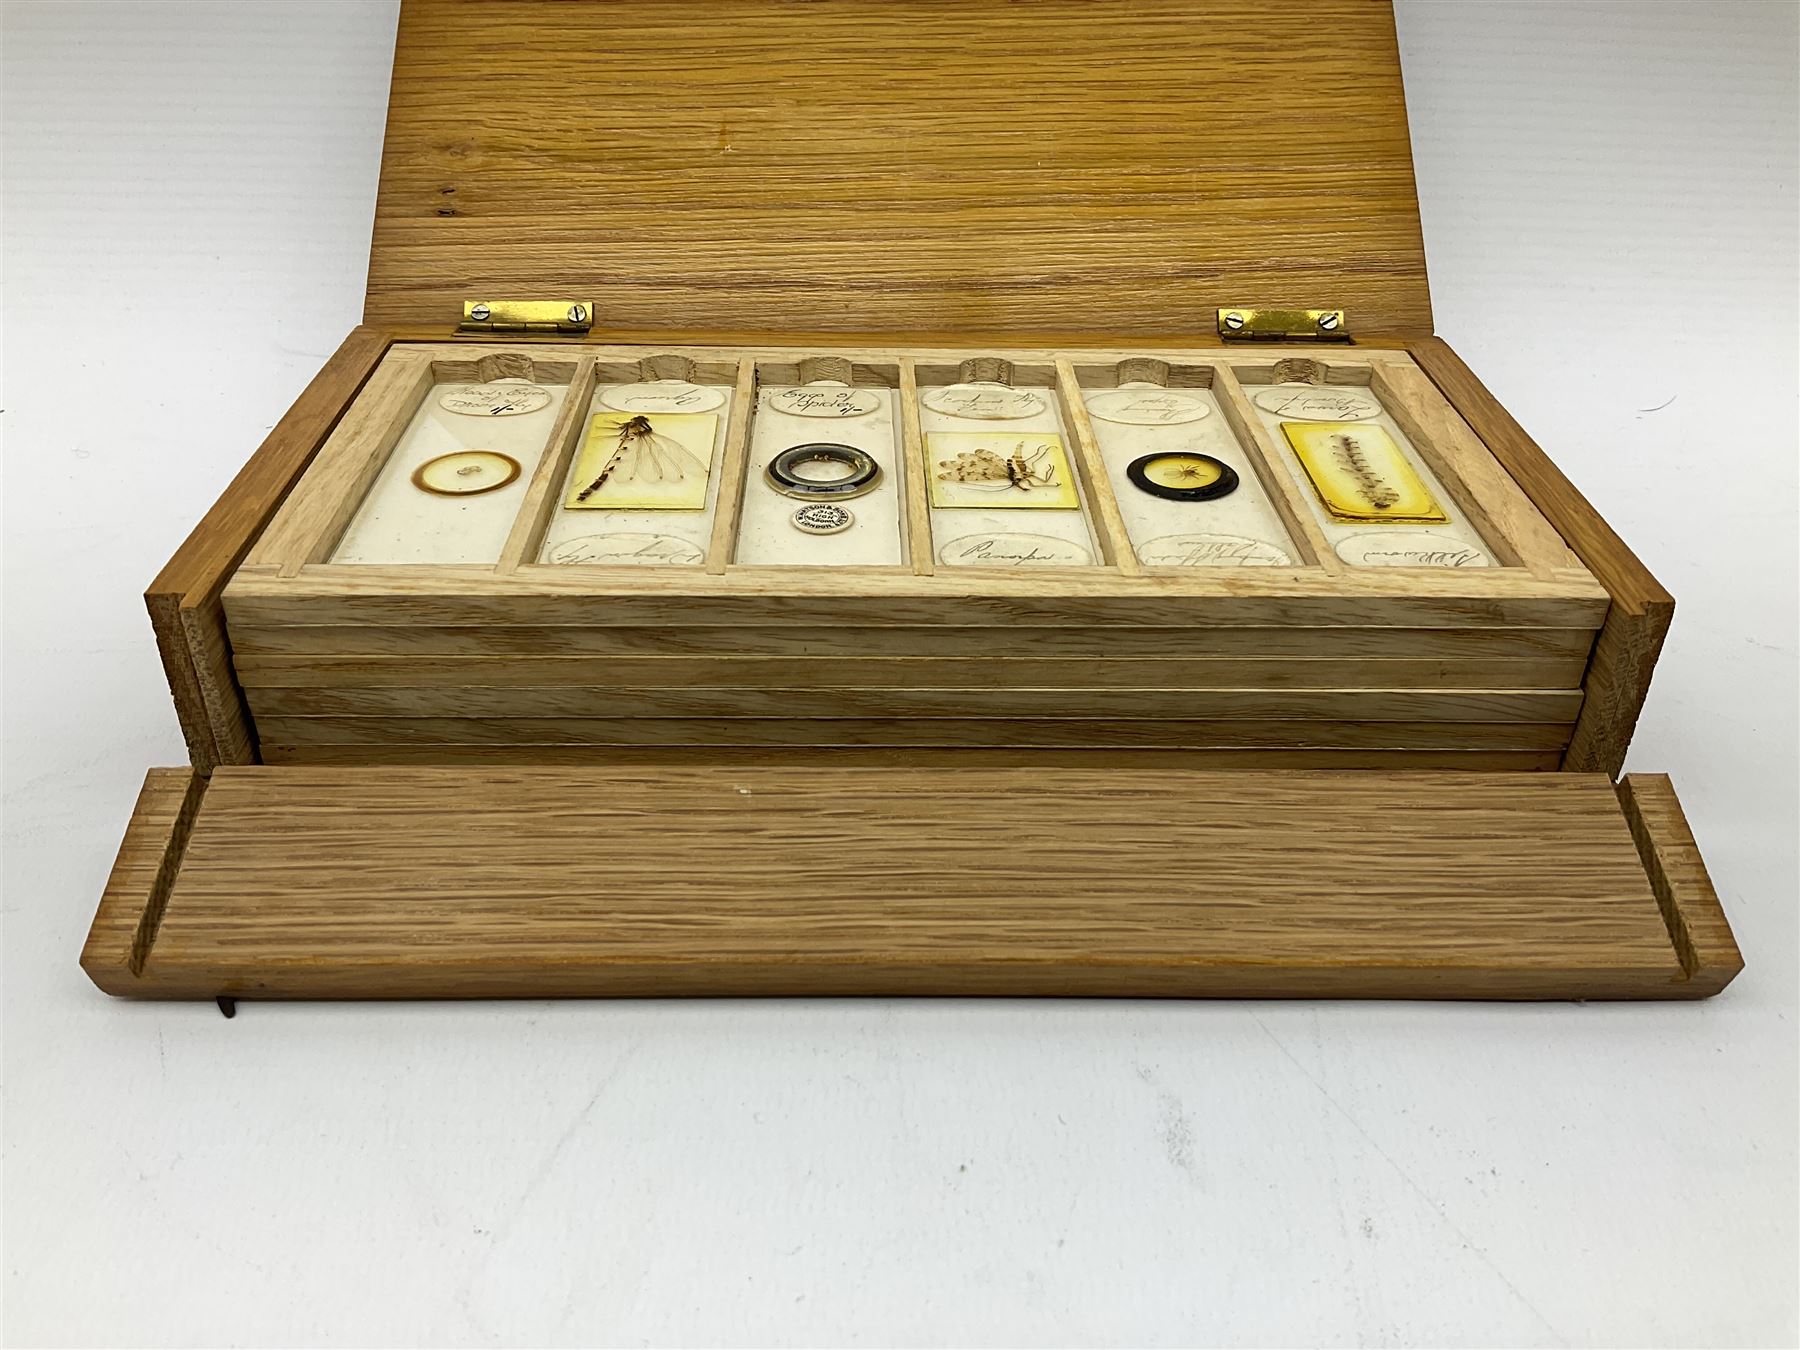 Milbro microscope in a wooden case - Image 5 of 12